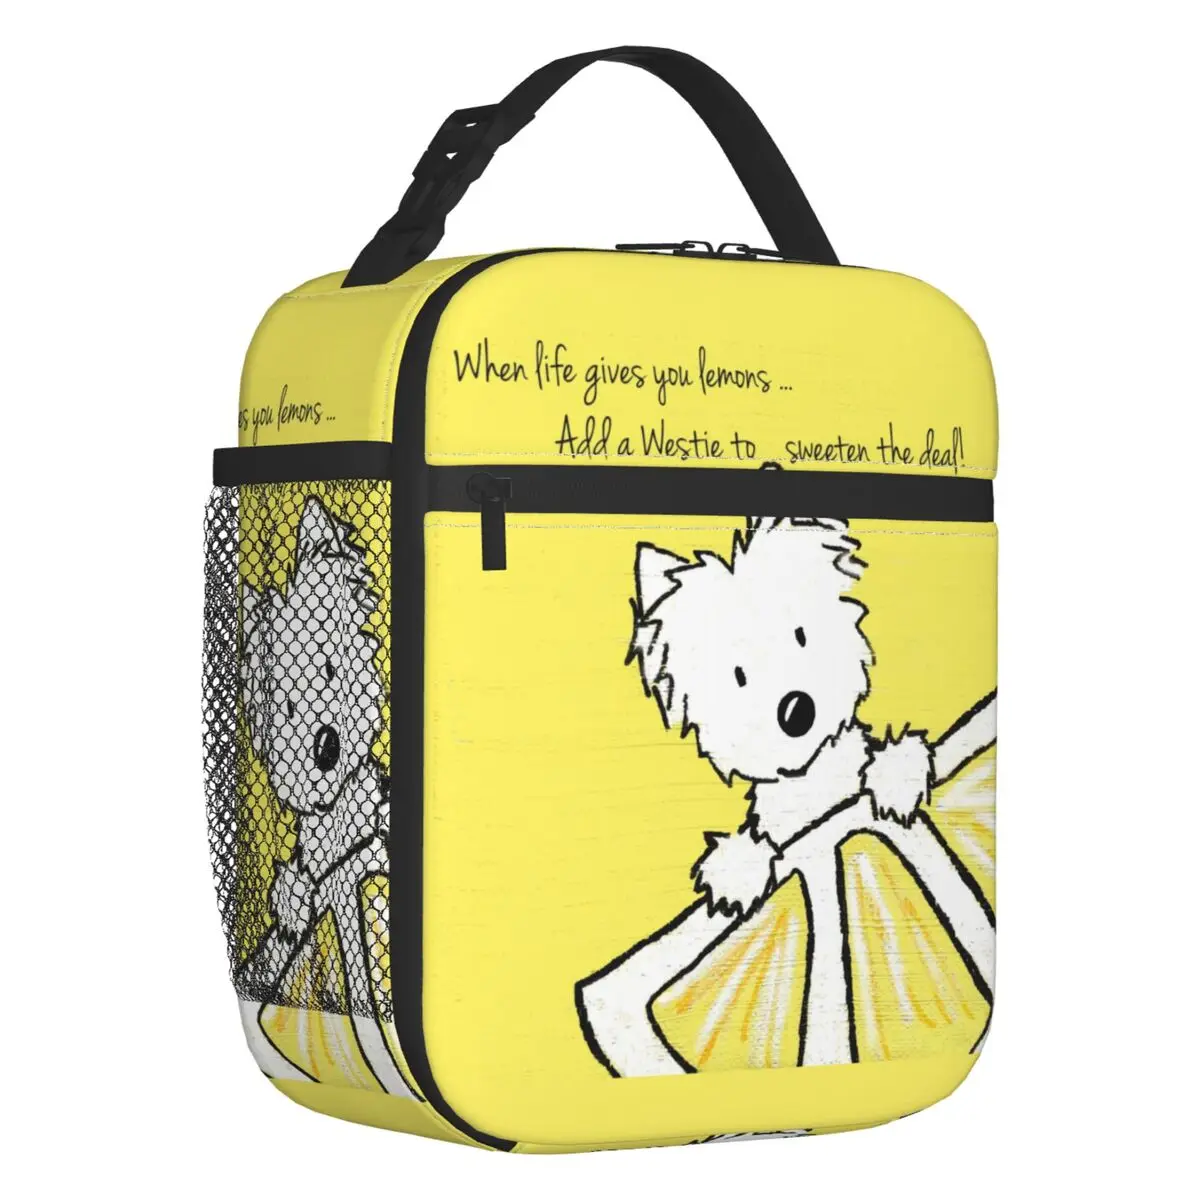 

Life Lemons Westie Dog Portable Lunch Boxes Leakproof West Highland White Terrier Cooler Thermal Food Insulated Lunch Bag Kids